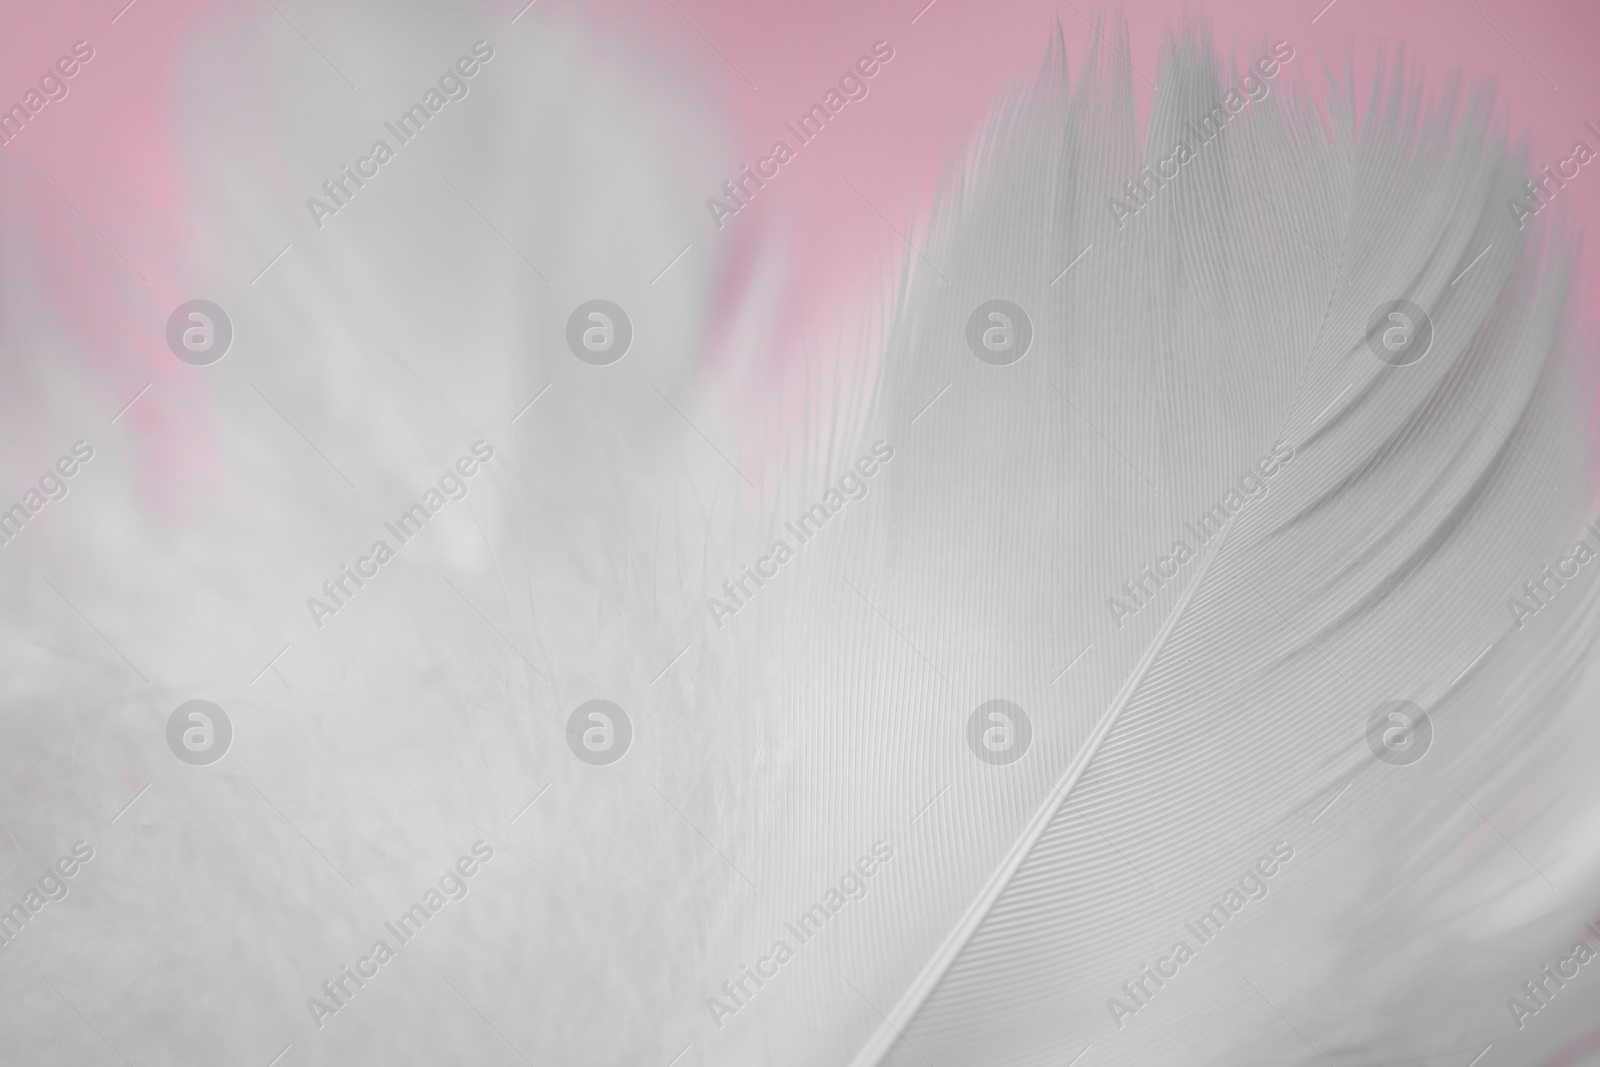 Photo of Fluffy bird feathers on pink background, closeup